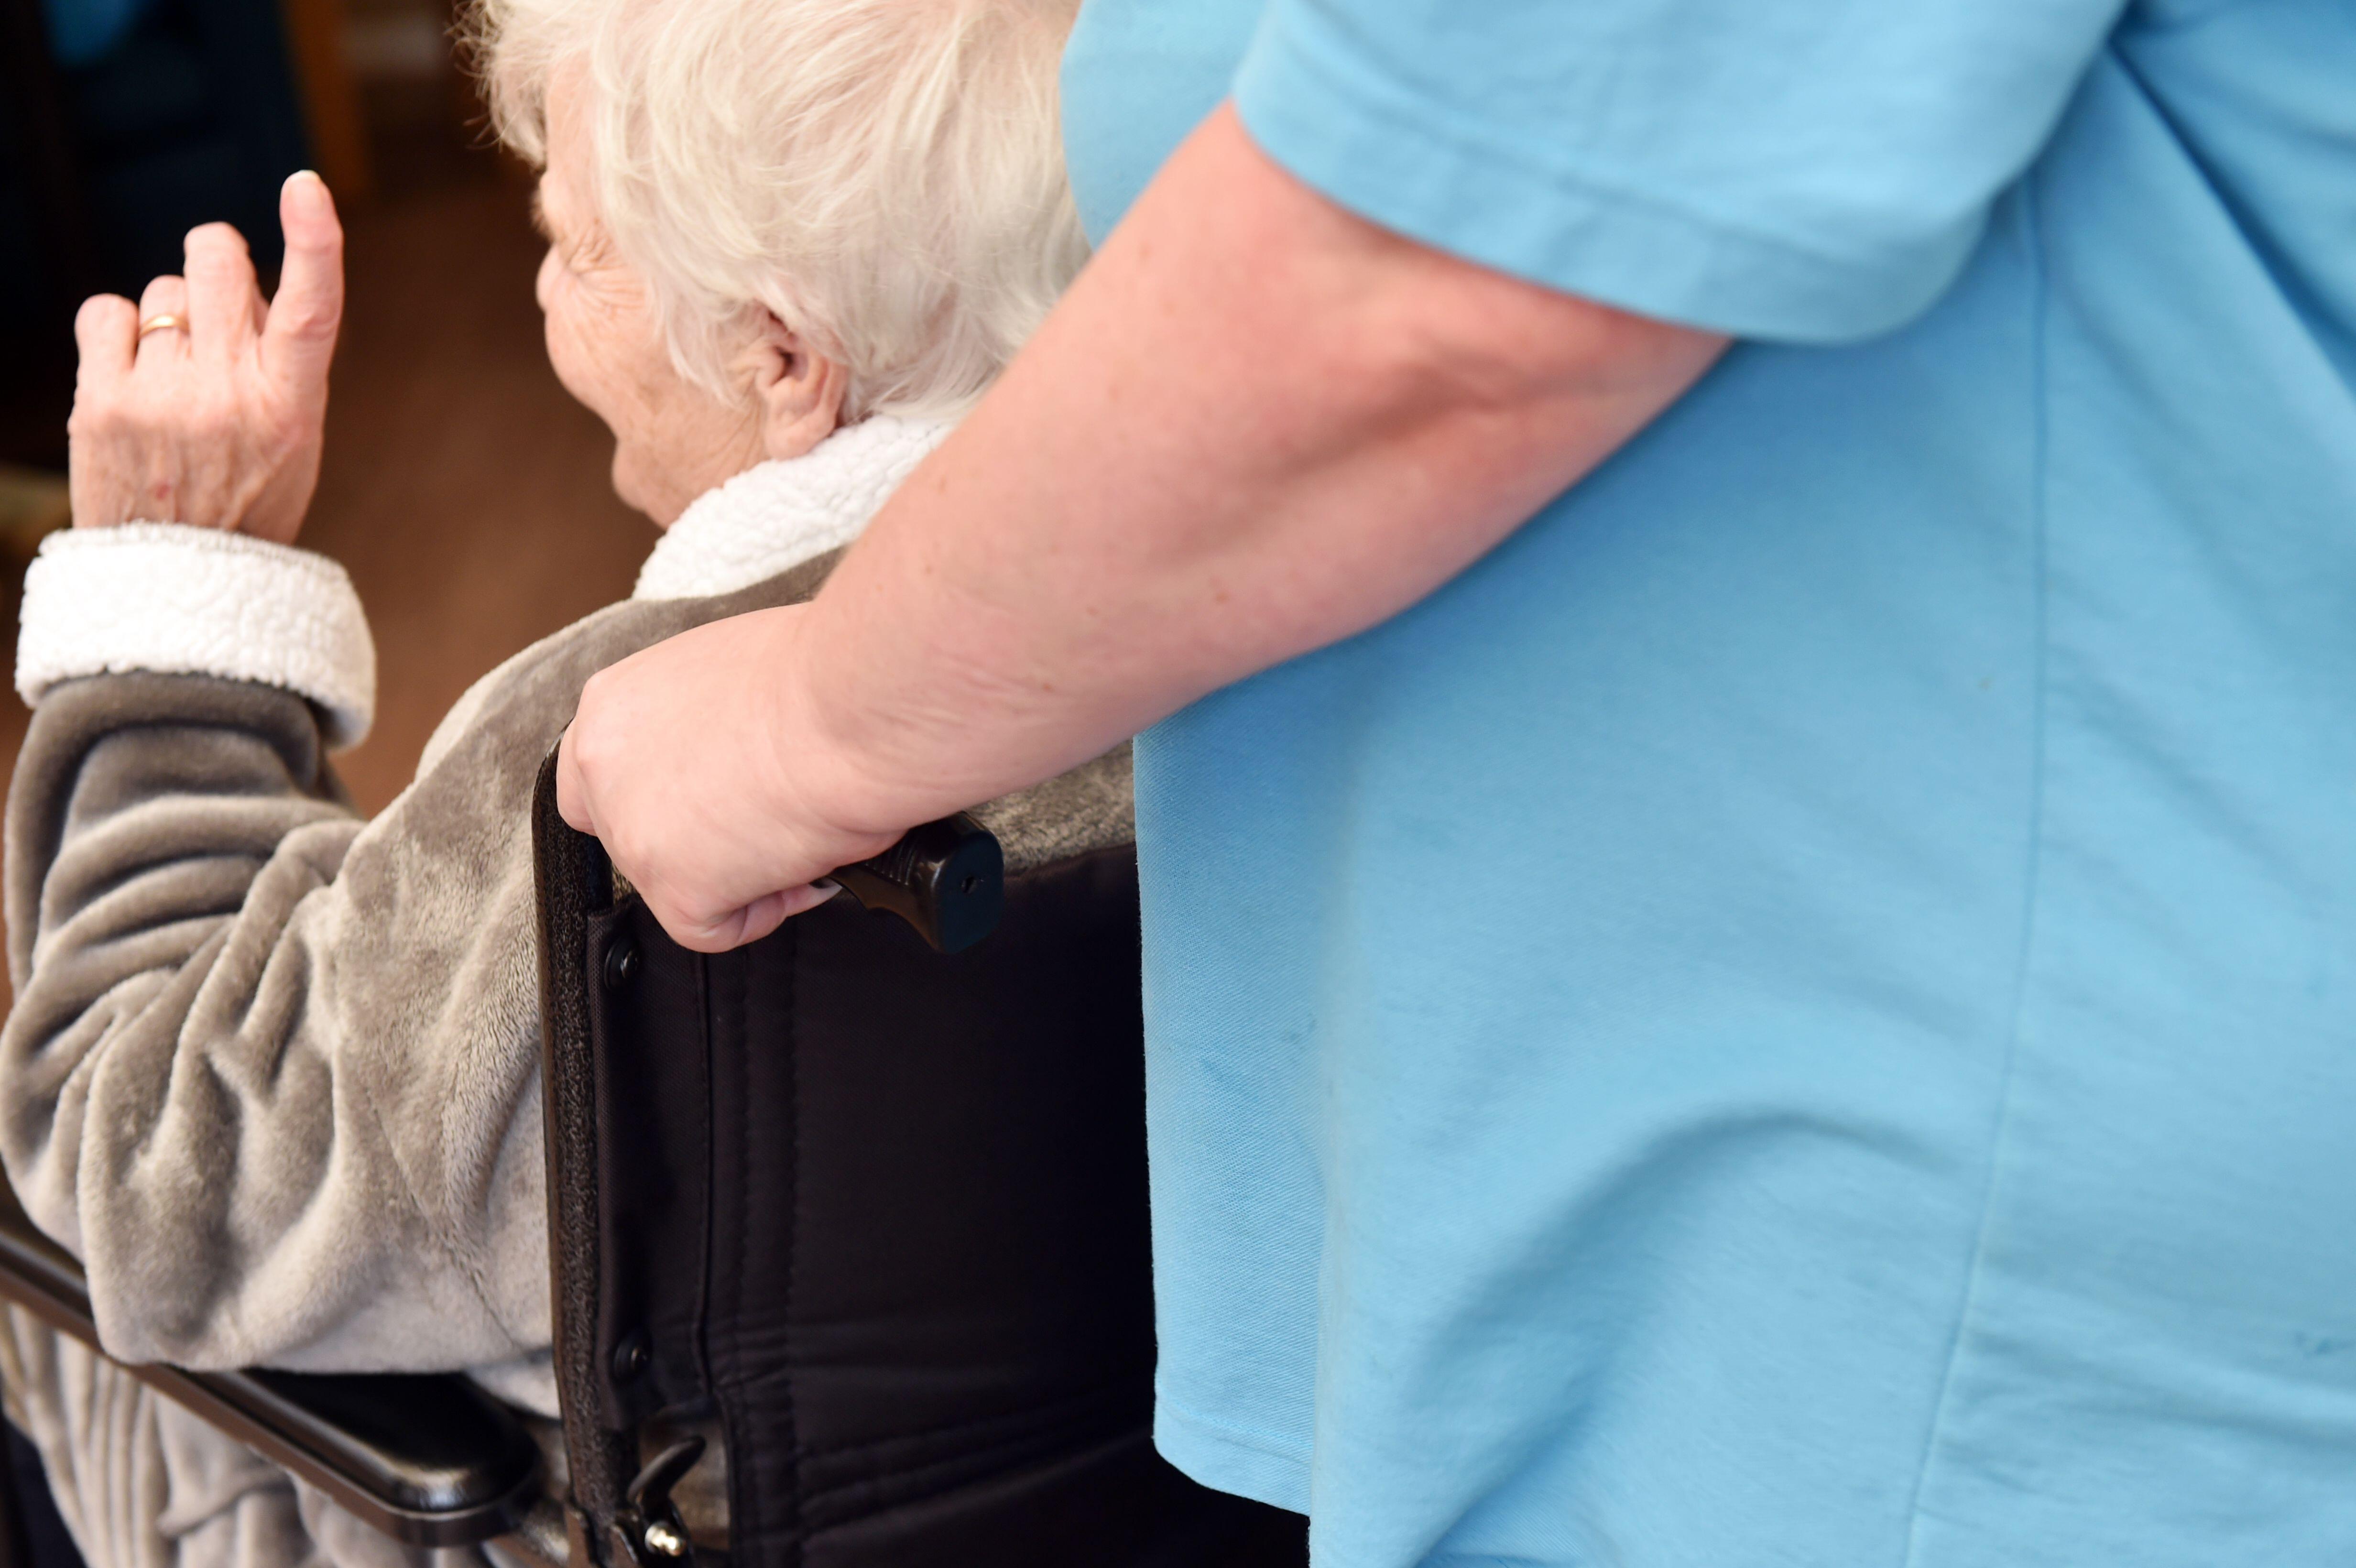 Care home staff help elderly people move about the care home, Yorkshire UK